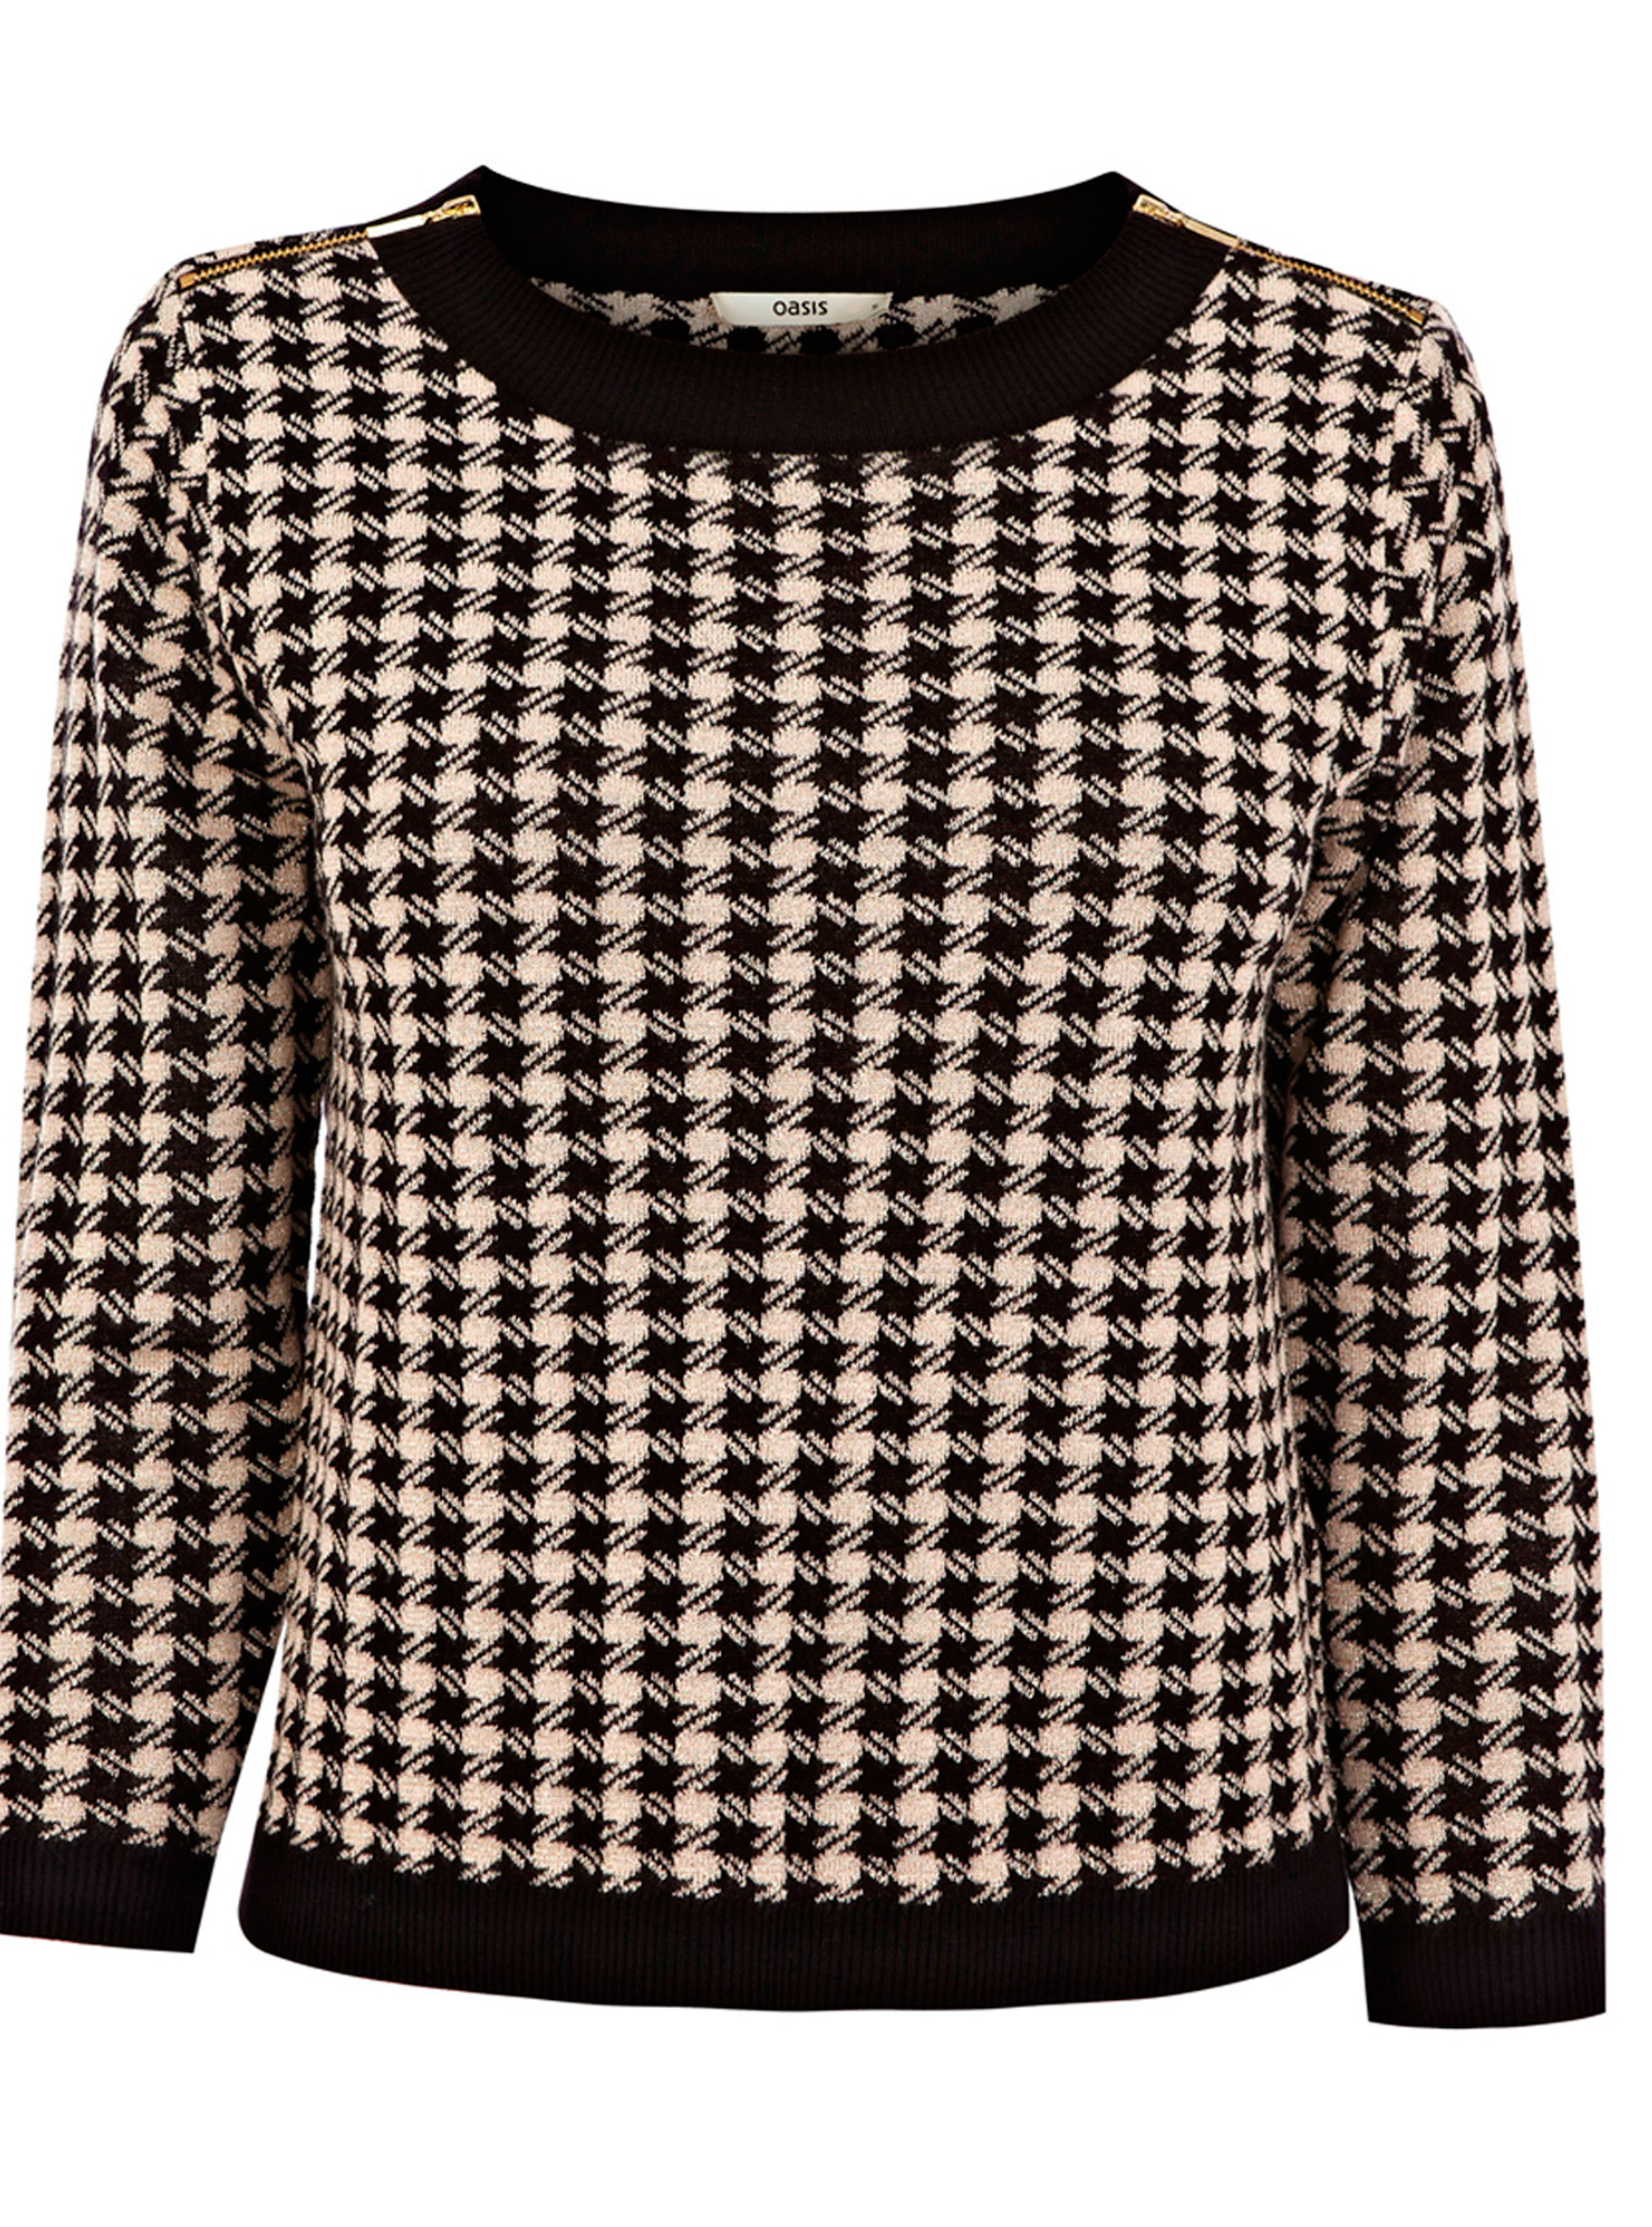 Oasis Dogtooth Jumper photo